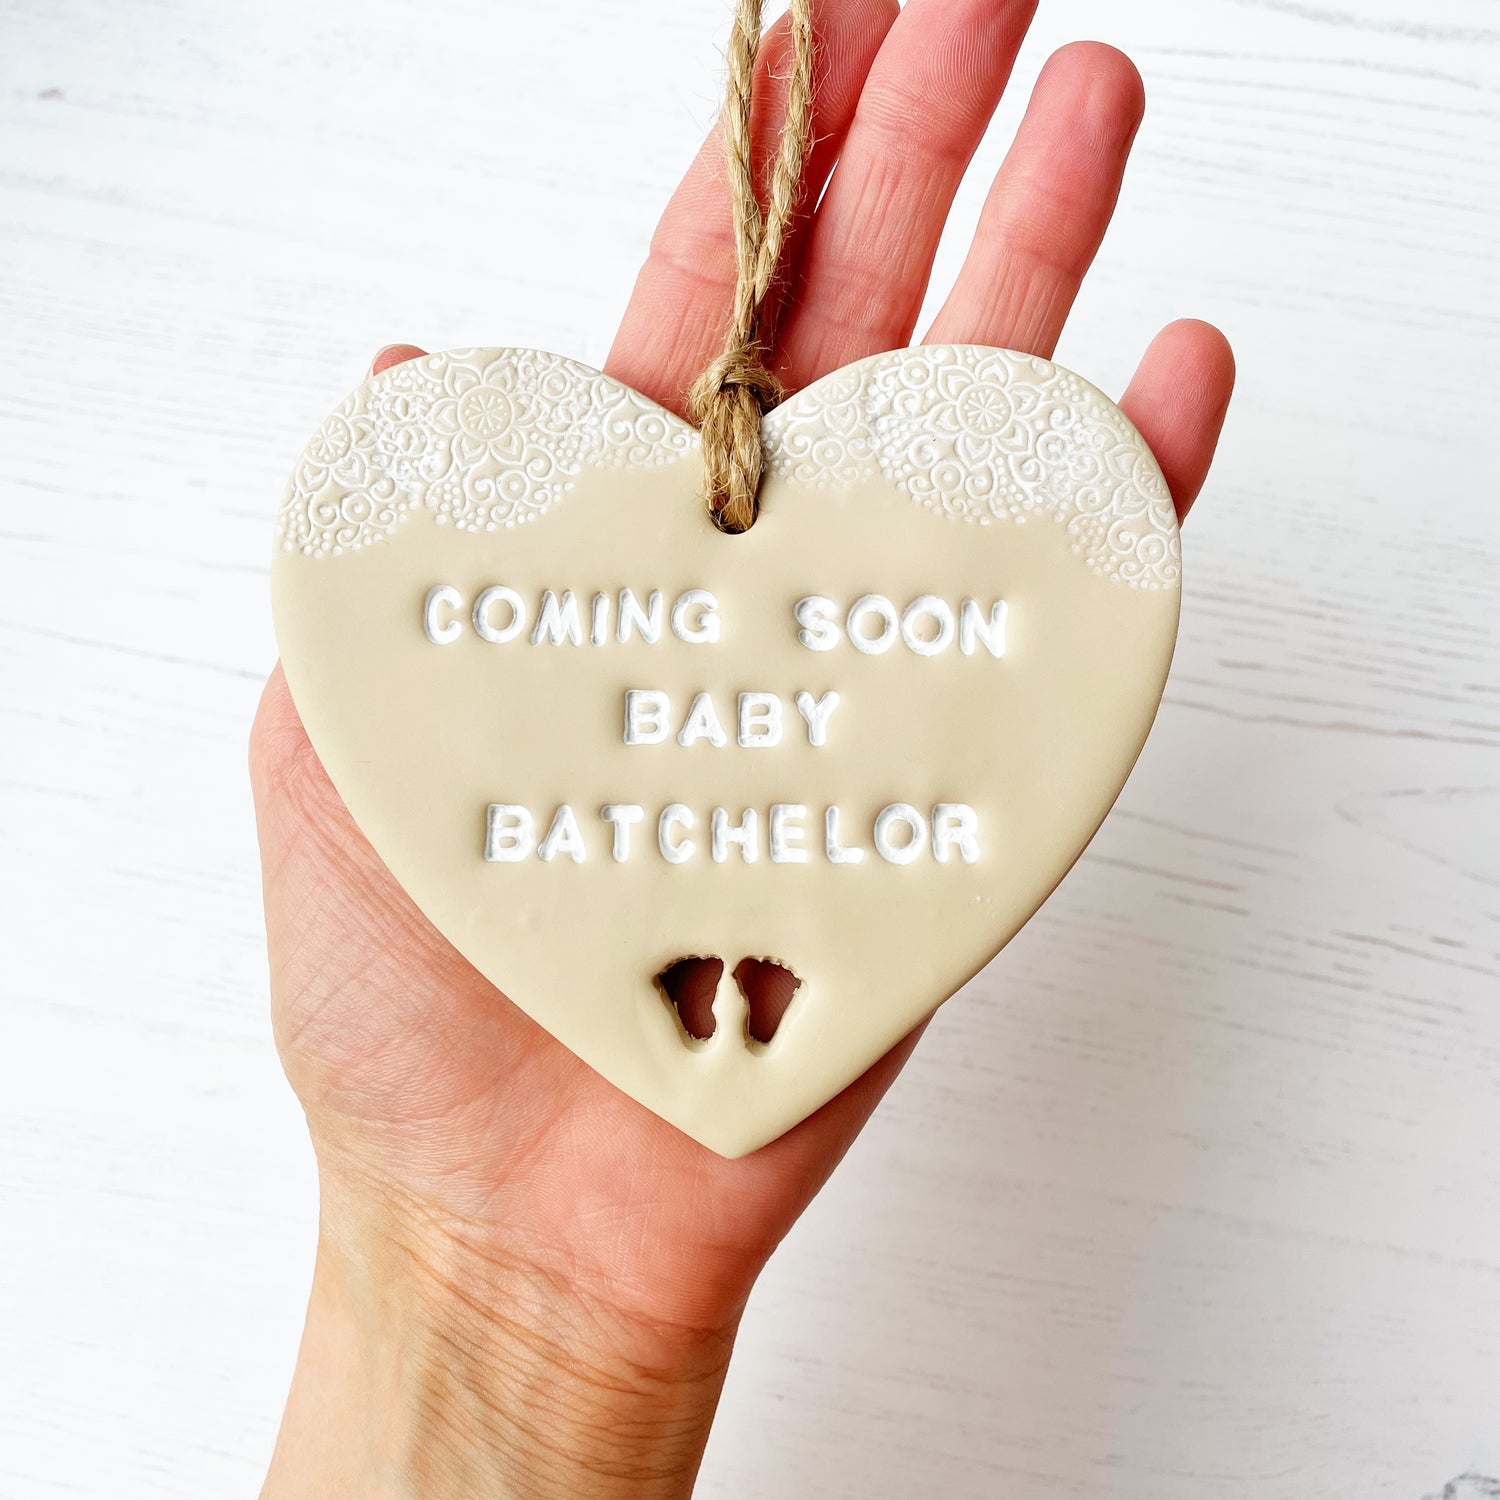 Personalised pregnancy reveal sign keepsake, beige clay hanging heart with a white lace edge at the top of the heart and baby feet cut out at the bottom, the heart is personalised with COMING SOON BABY BATCHELOR